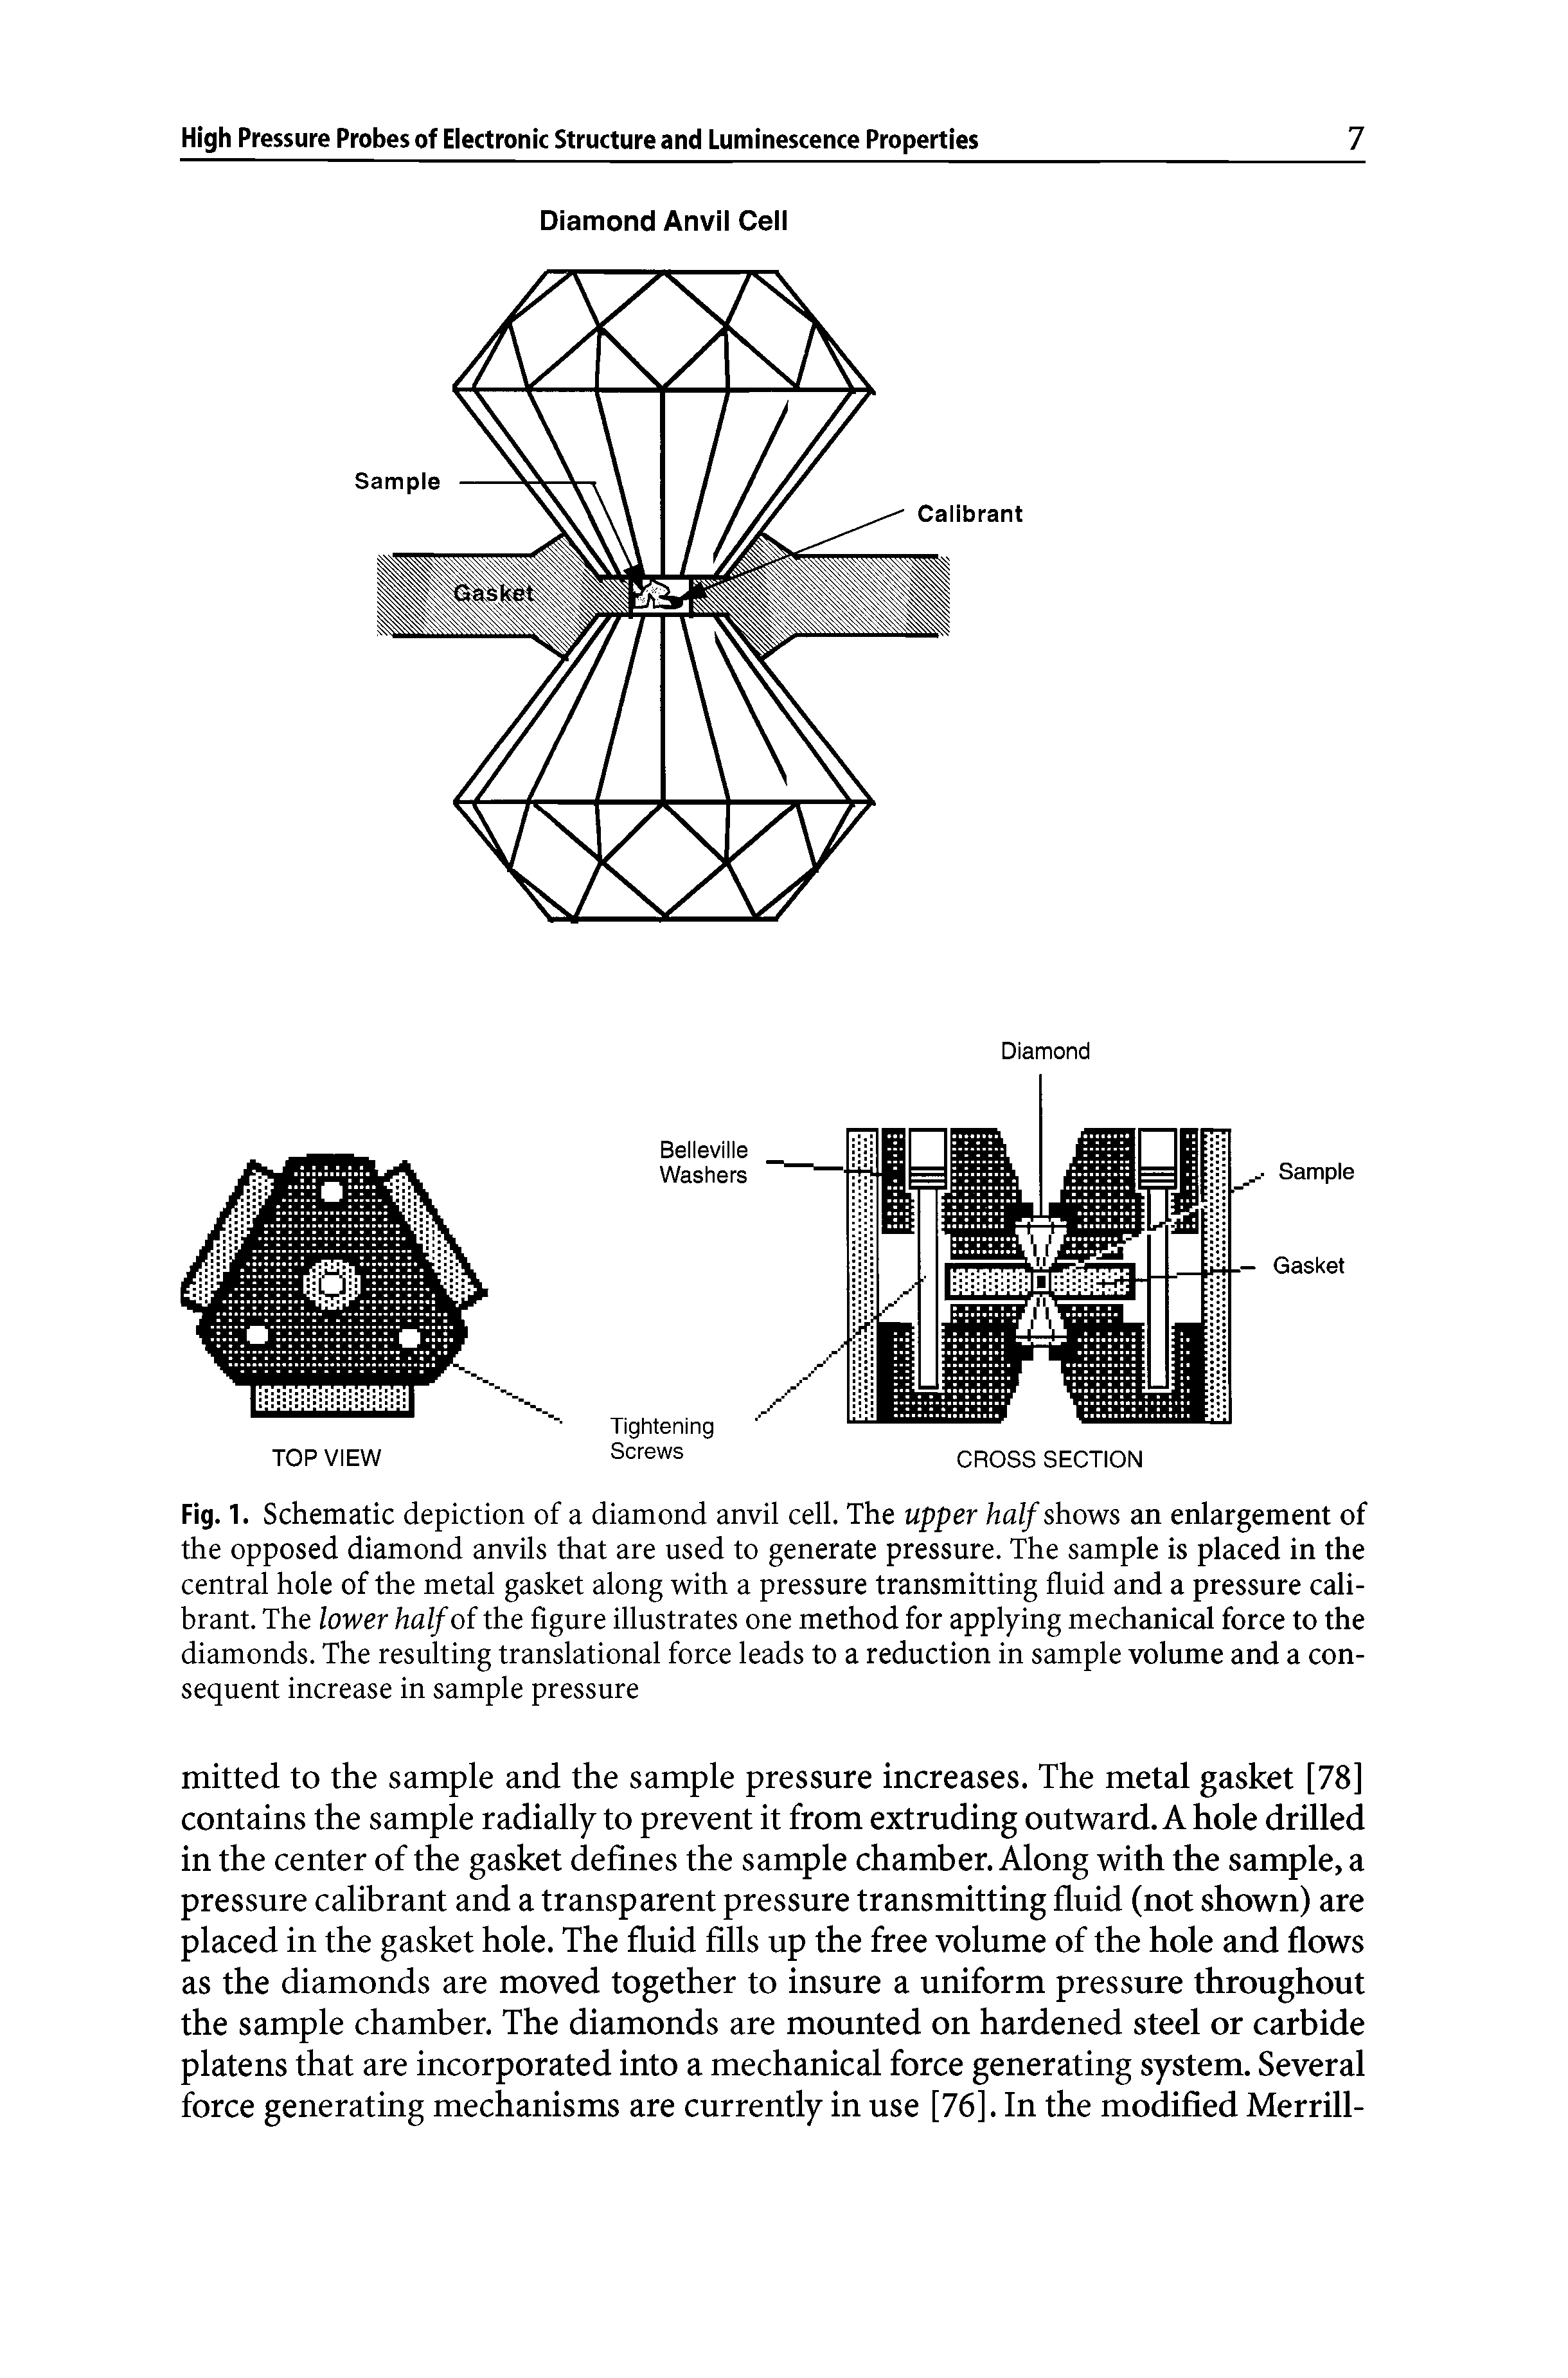 Fig. 1. Schematic depiction of a diamond anvil cell. The upper half shows an enlargement of the opposed diamond anvils that are used to generate pressure. The sample is placed in the central hole of the metal gasket along with a pressure transmitting fluid and a pressure cali-brant. The lower half of the figure illustrates one method for applying mechanical force to the diamonds. The resulting translational force leads to a reduction in sample volume and a consequent increase in sample pressure...